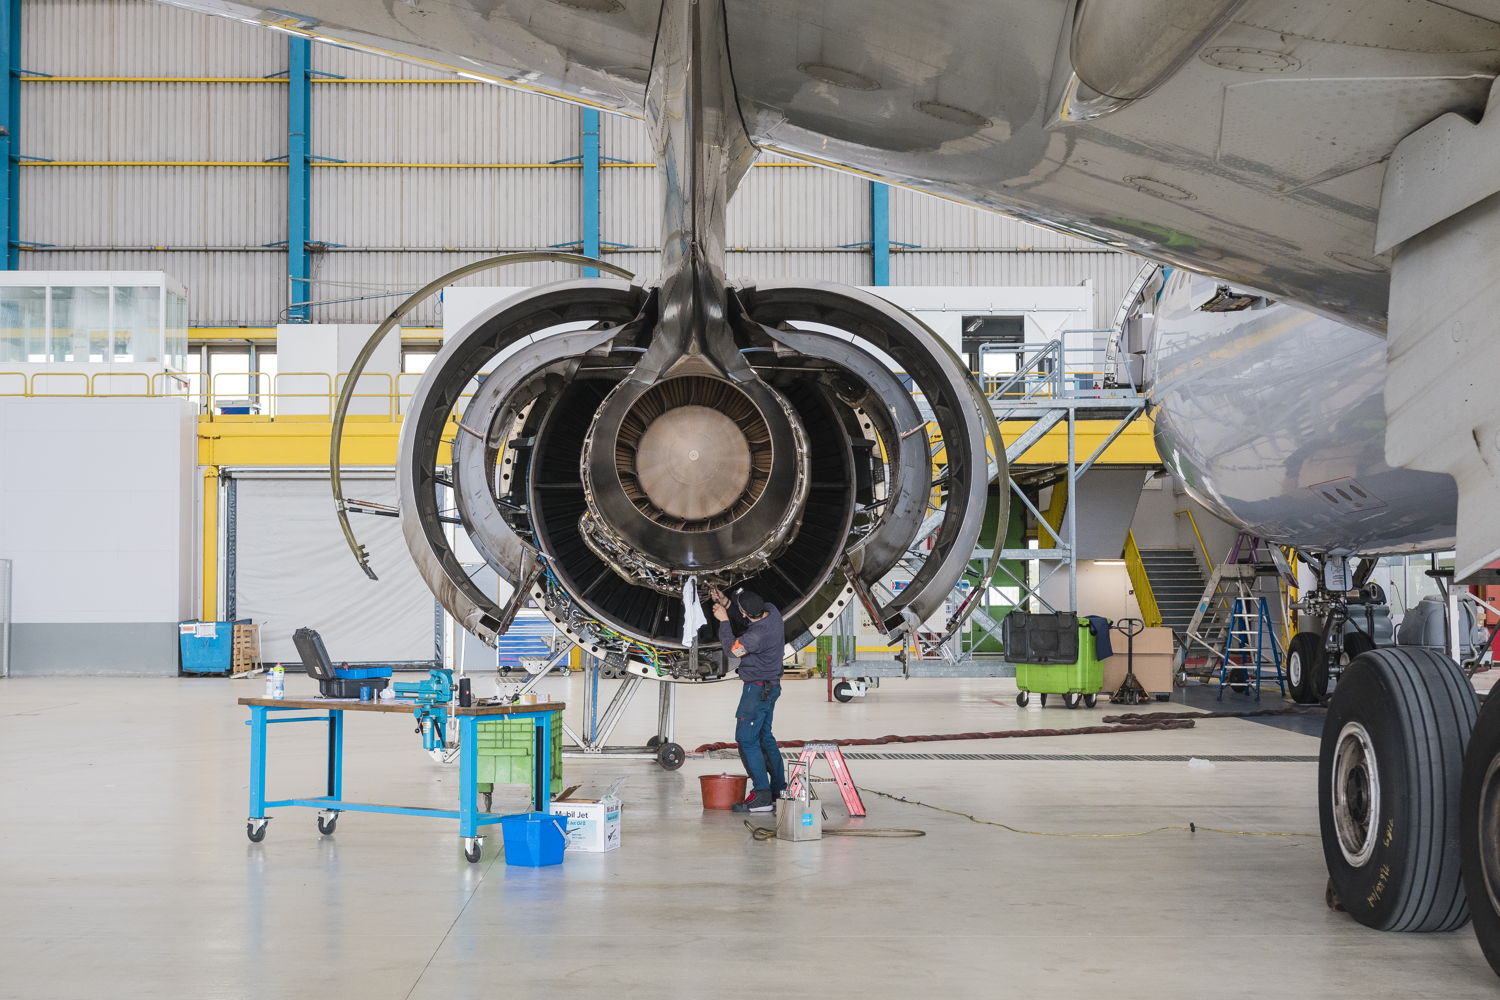 Brussels Airlines is looking for technicians